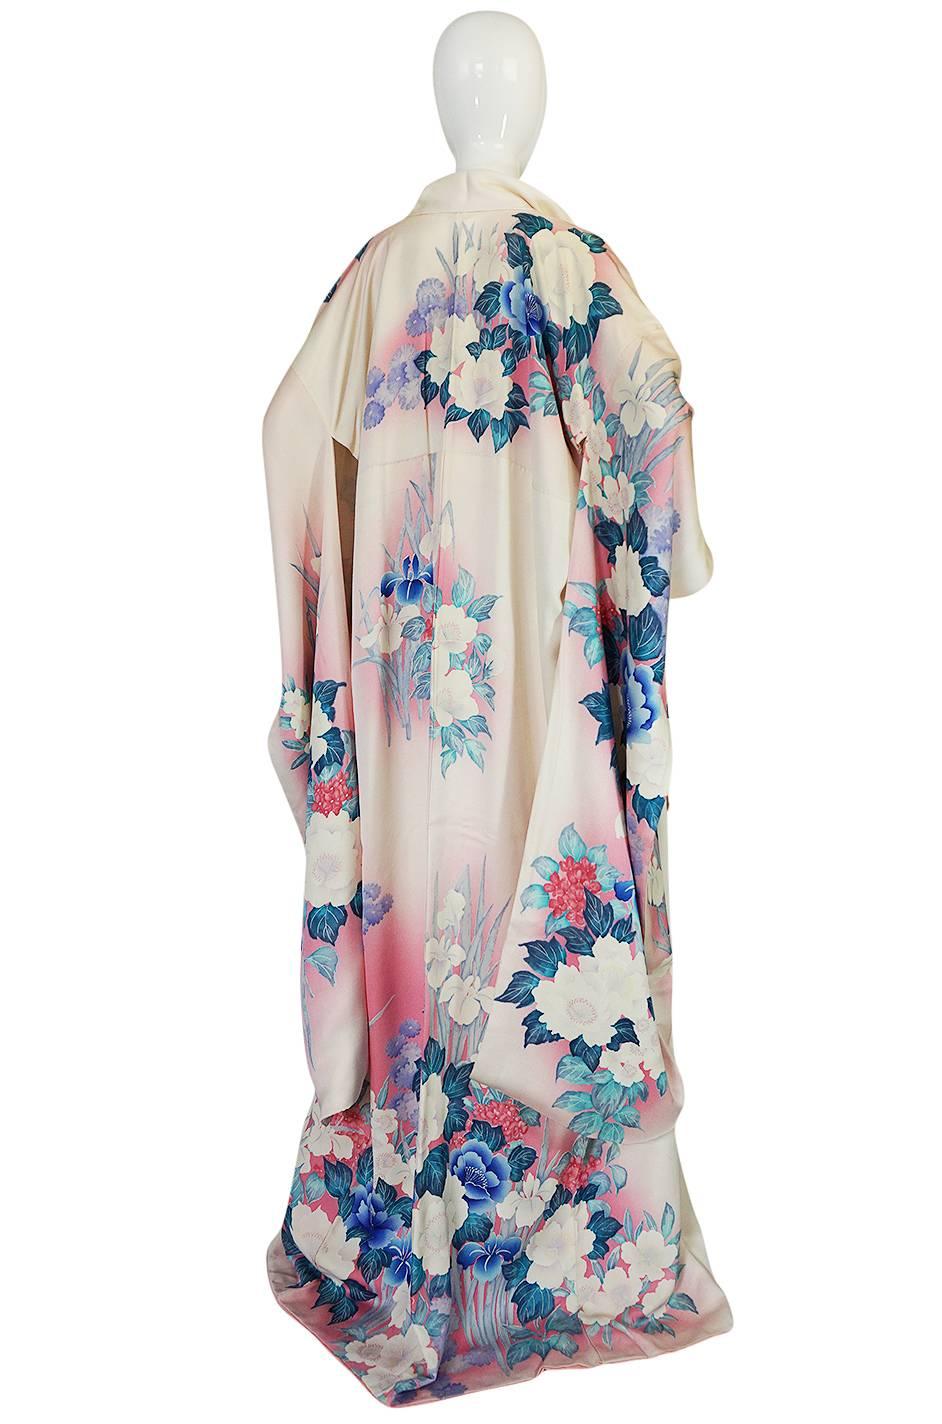 This stunning silk kimono has a dreamy and romantic print in shades of pinks and blues that range from the palest of colors to a deeply saturated pastel. It looks to have never been worn or used and would be perfect to use as wedding kimono or on